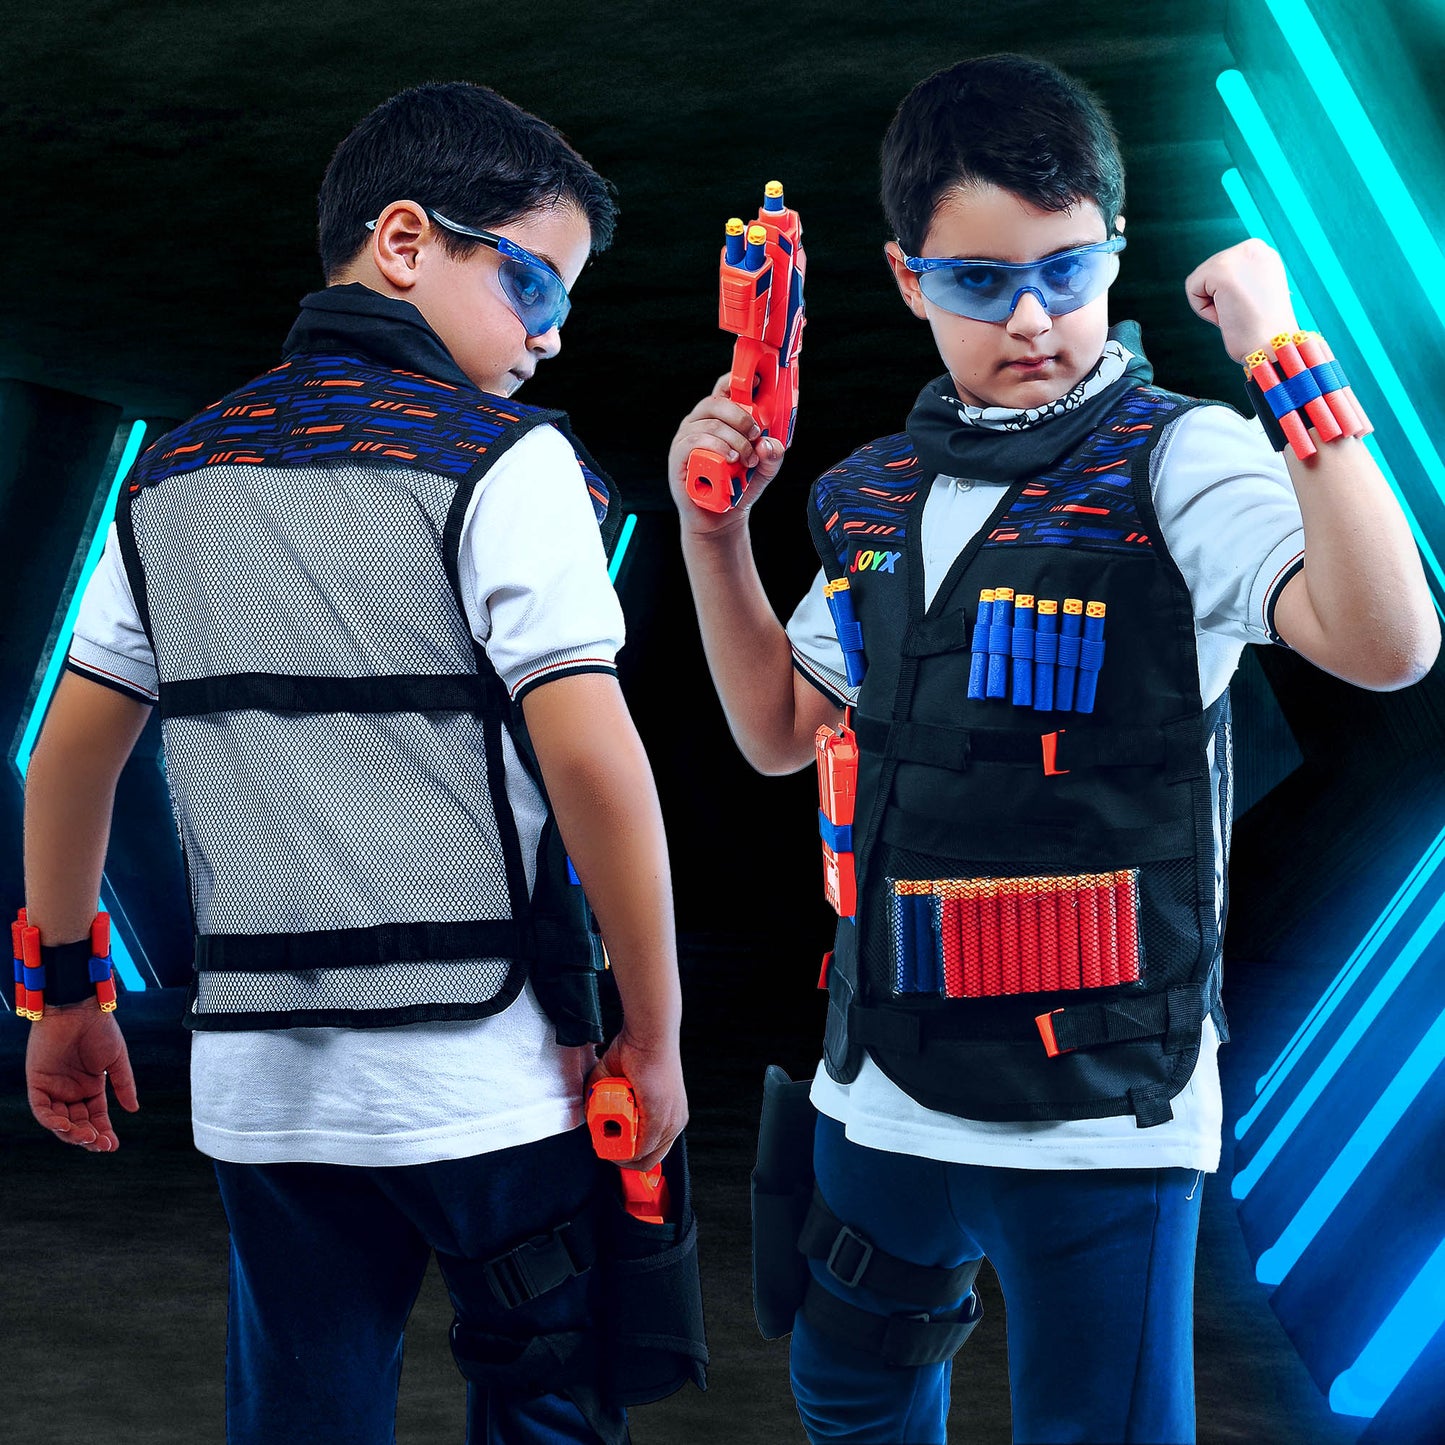 Nerf vest for kids with toy guns and darts